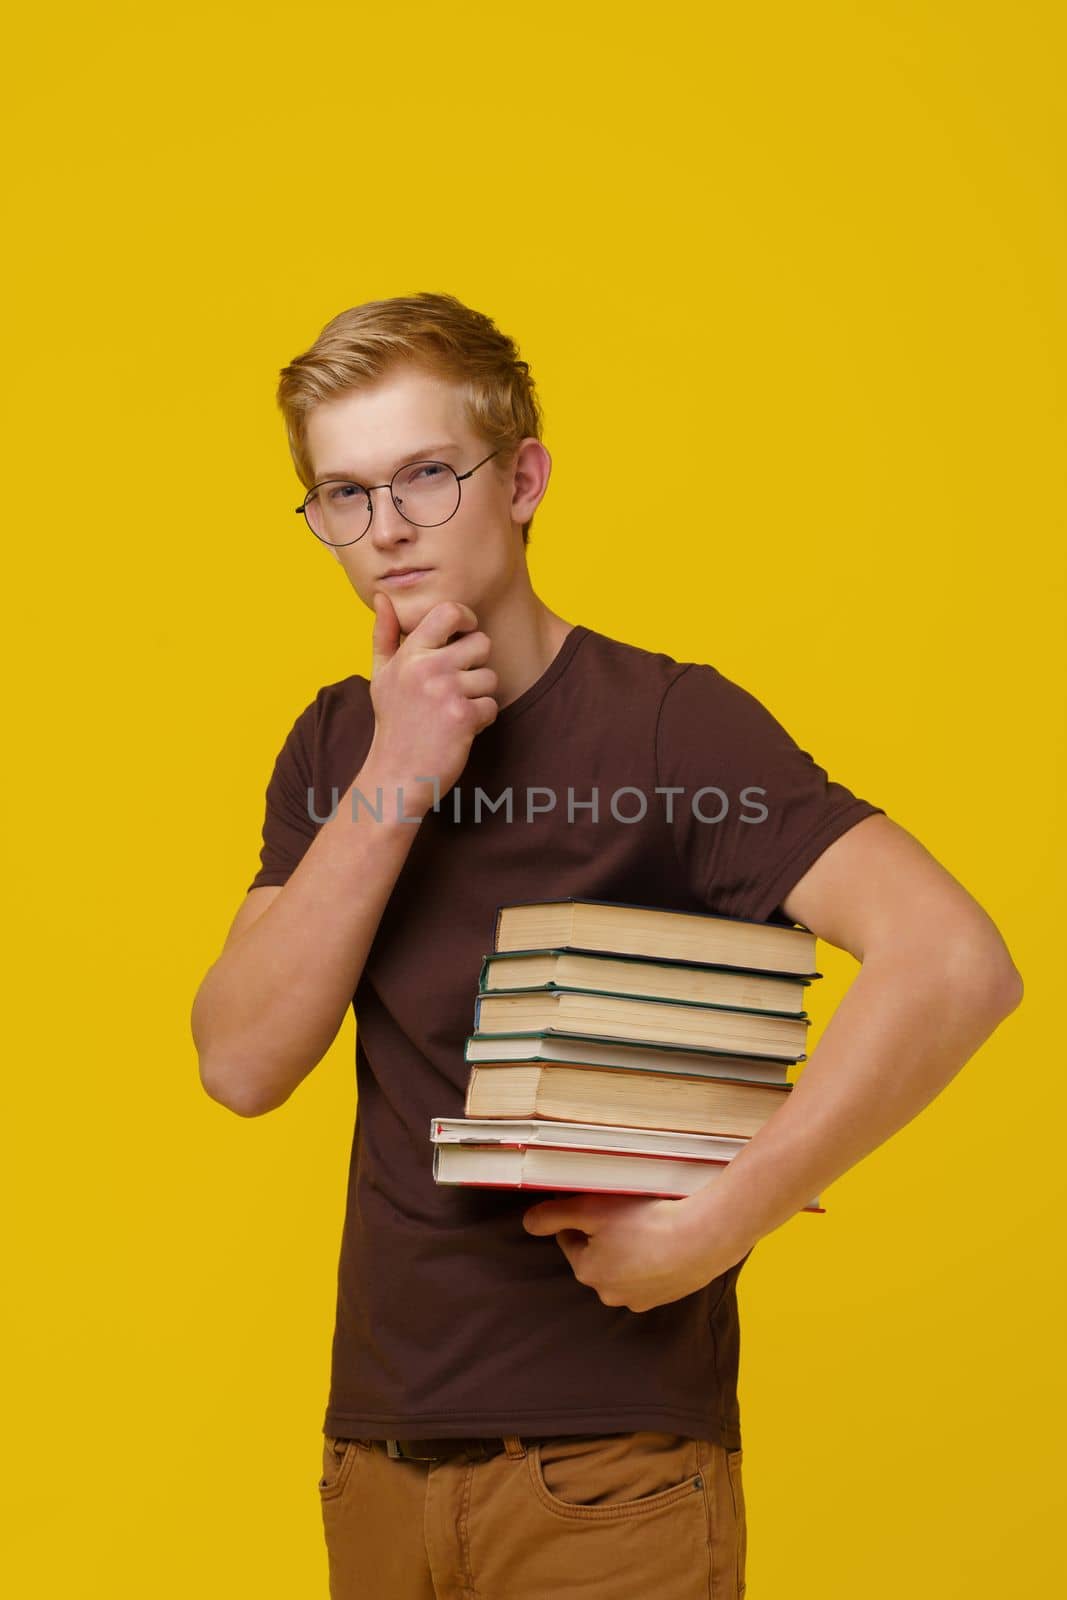 Knowledge Acquisition, Education, Concept Training. A Brooding Young European Man in a Brown T-Shirt Holds a Stack of Books in His Hand on a Yellow Background. High quality photo